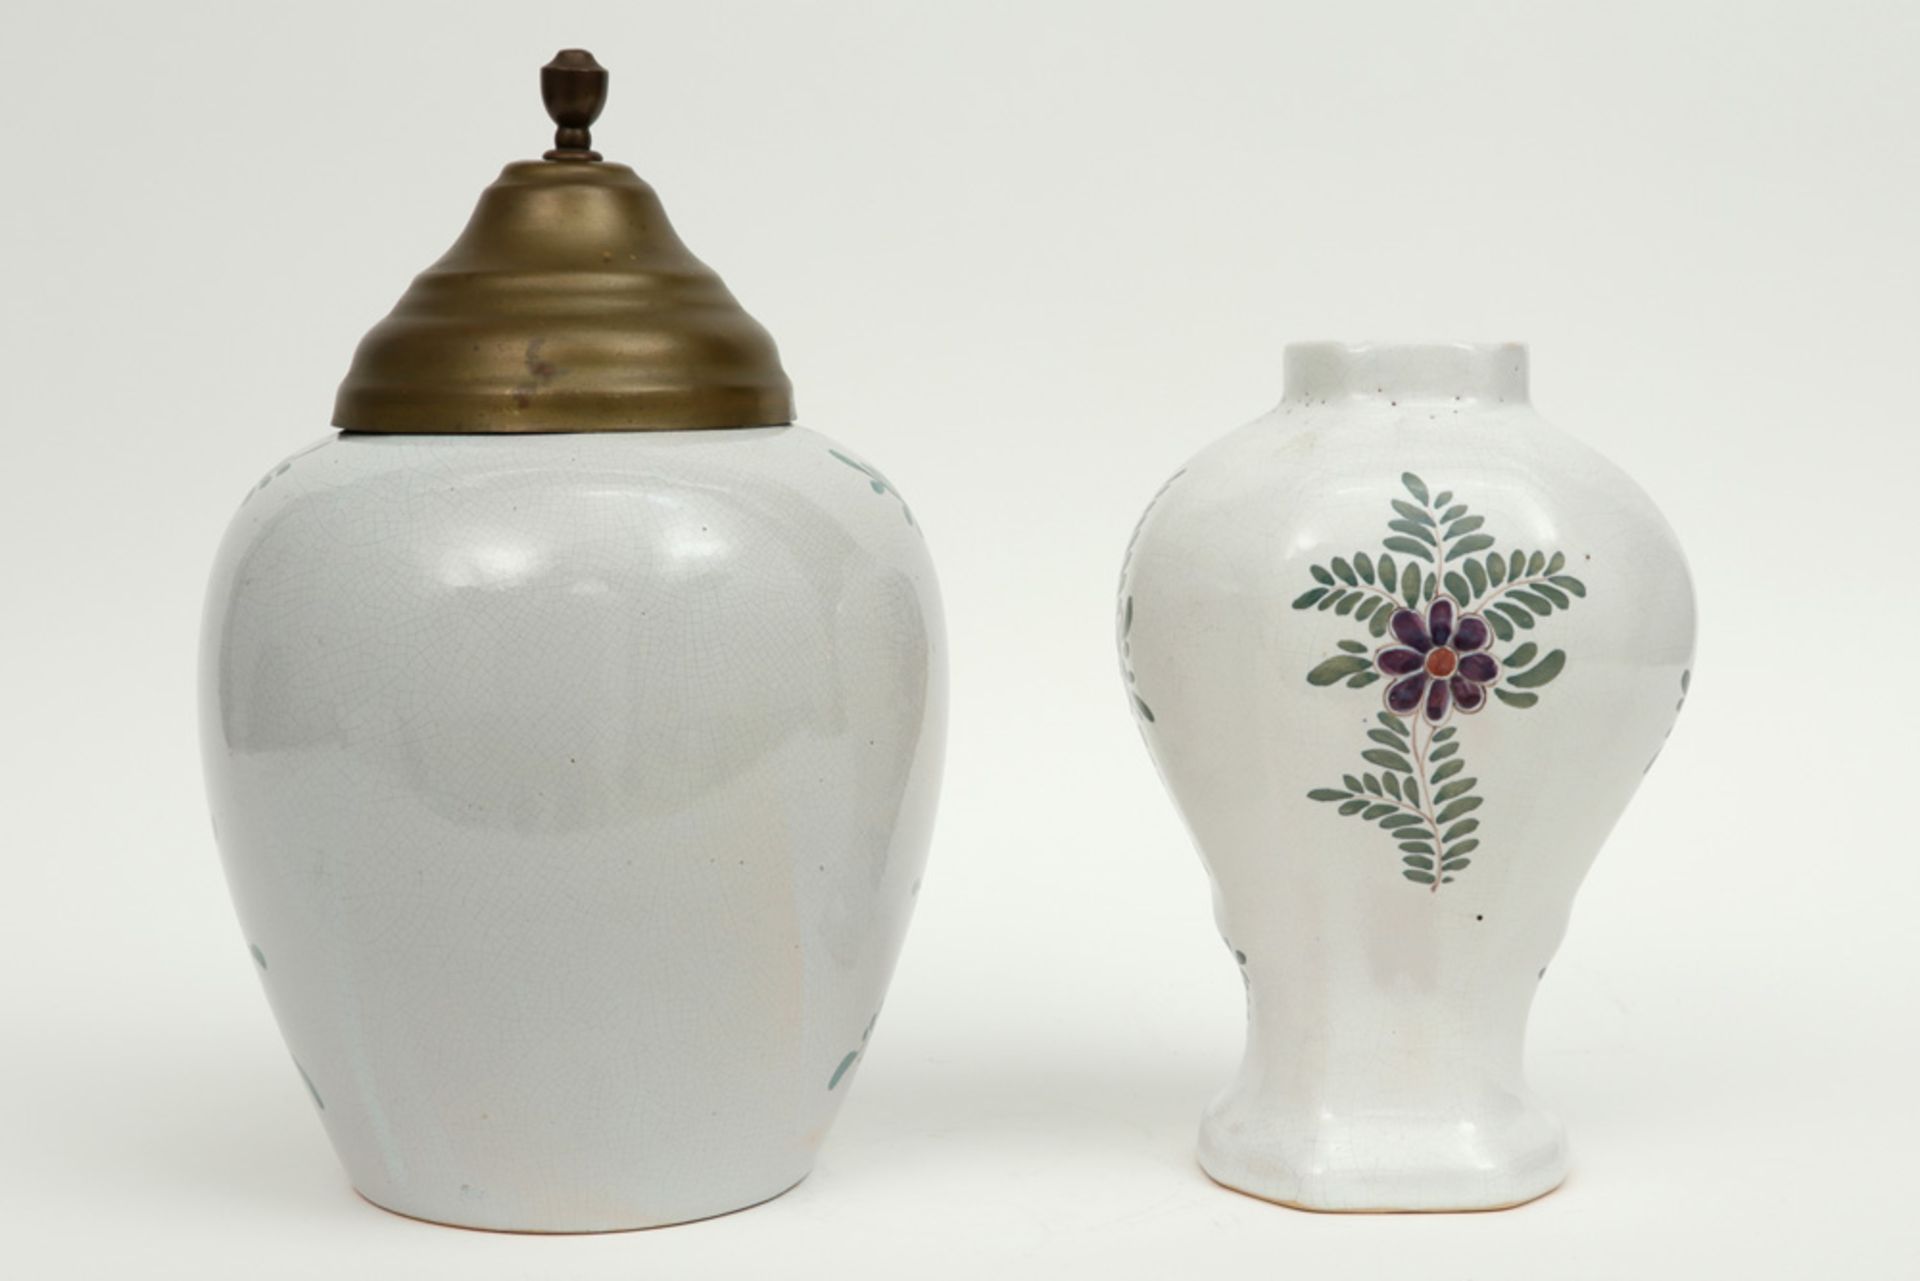 vase and tobacco jar in marked ceramic from Delft with a polychrome decor - Image 2 of 5